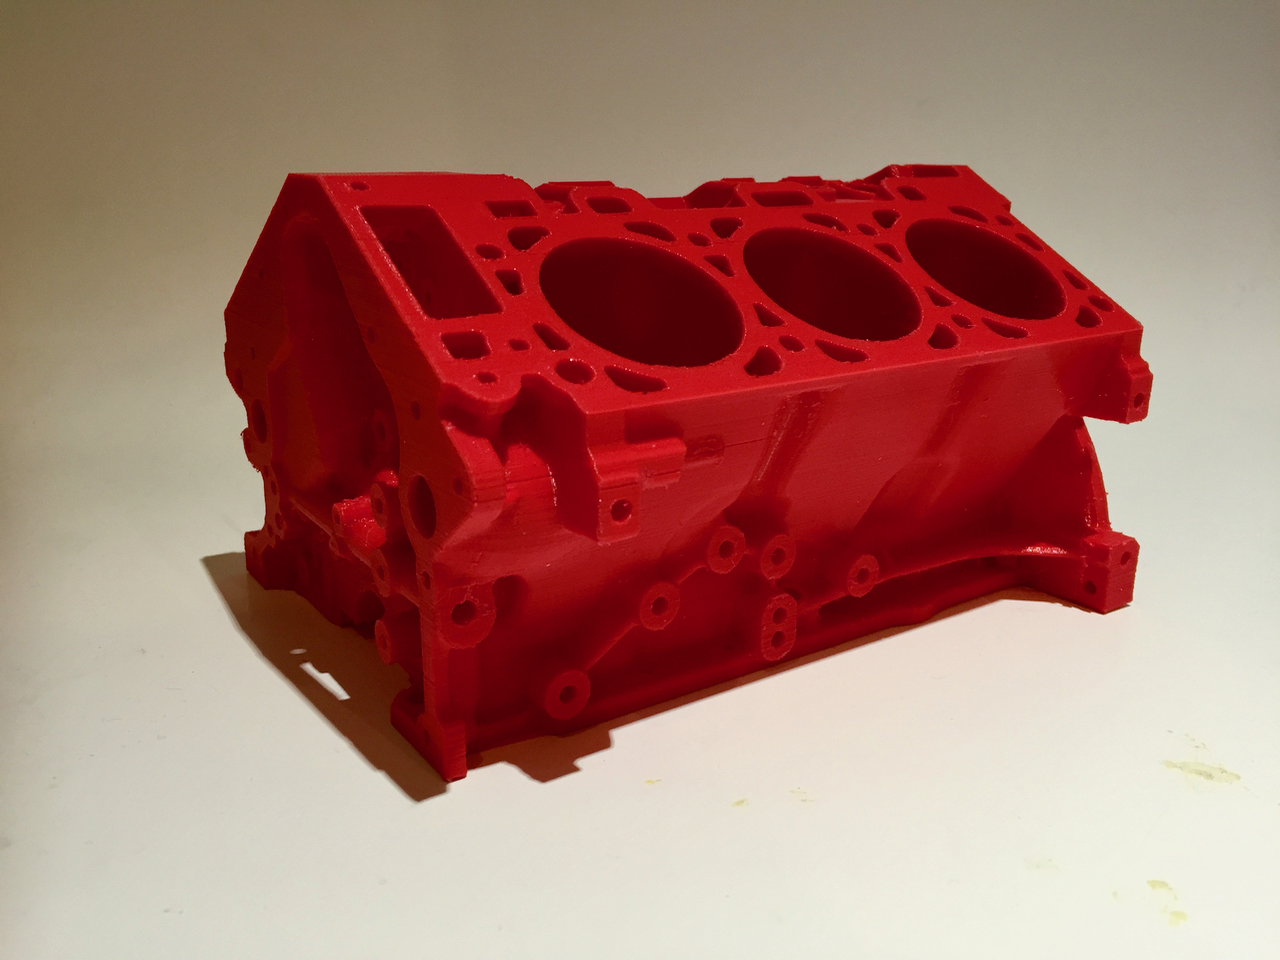  An enormous engine block print made on the MakerBot Replicator+ 